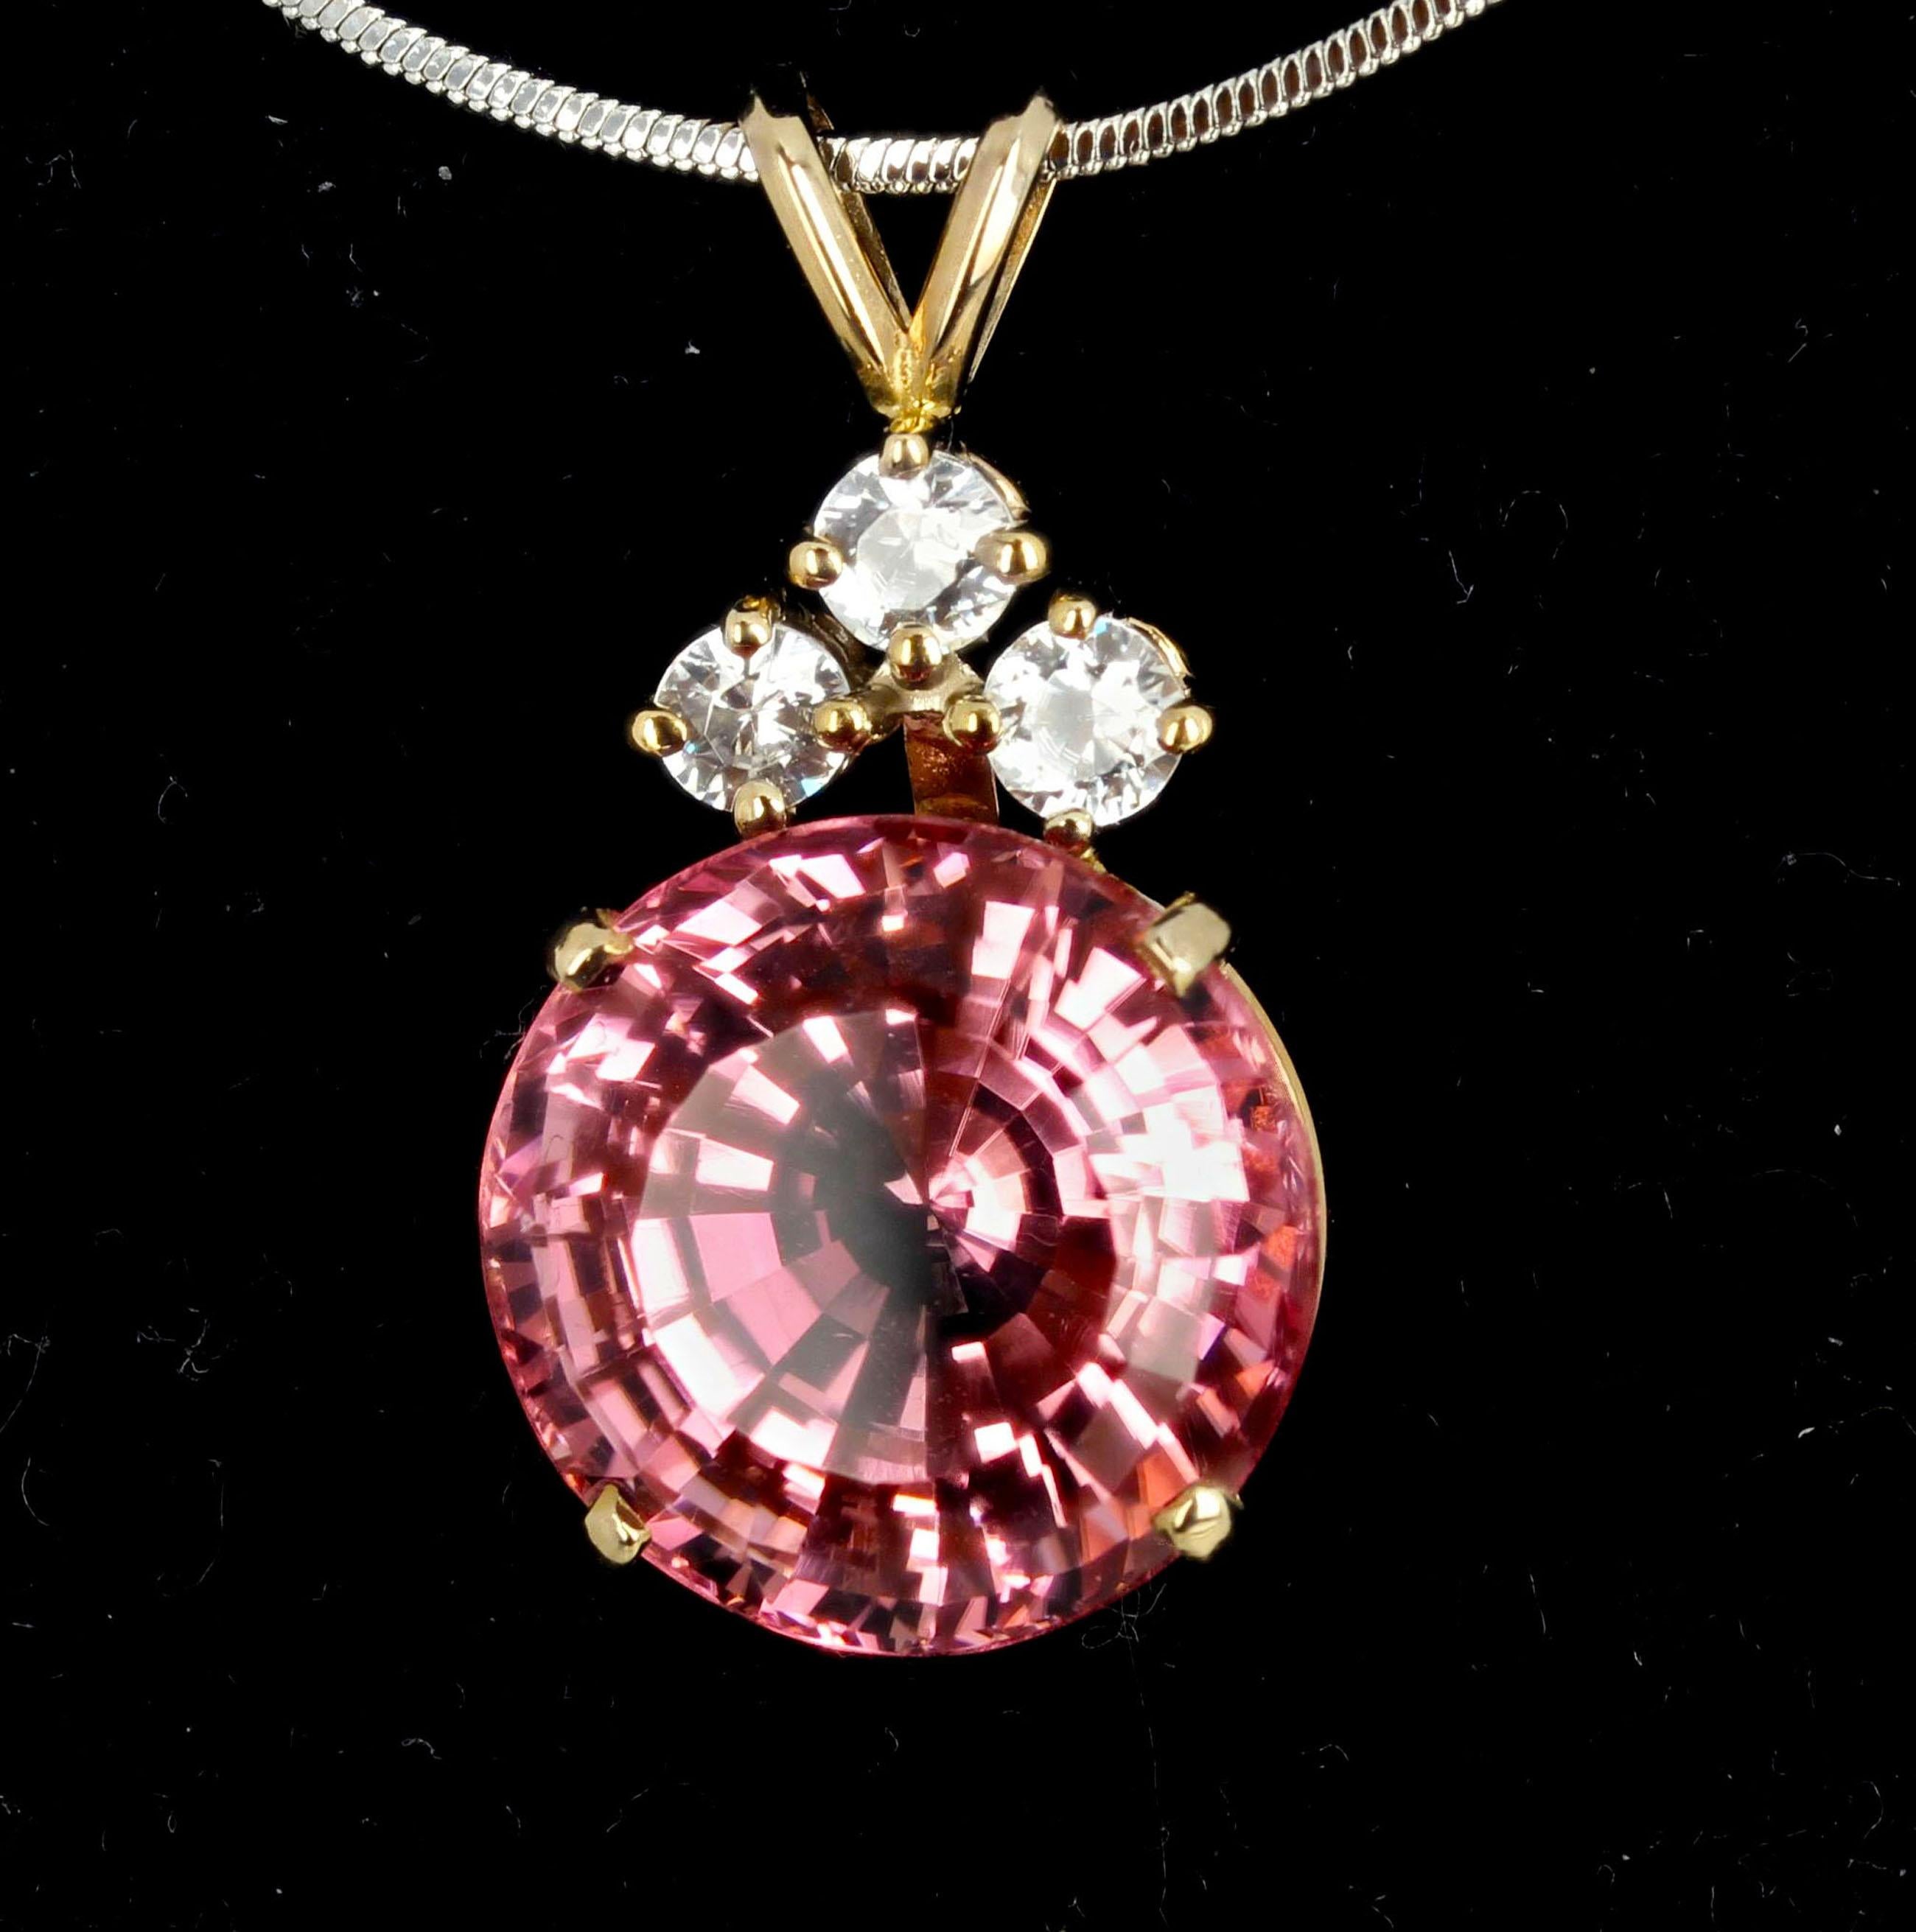 This beautiful pendant is a huge sparkling natural pink round gemcut 18.7 Carat 16 mm translucent clear Tourmaline enhanced with little glittering NATURAL white Spinels set in this lovely 10 Kt white gold pendant.  This 